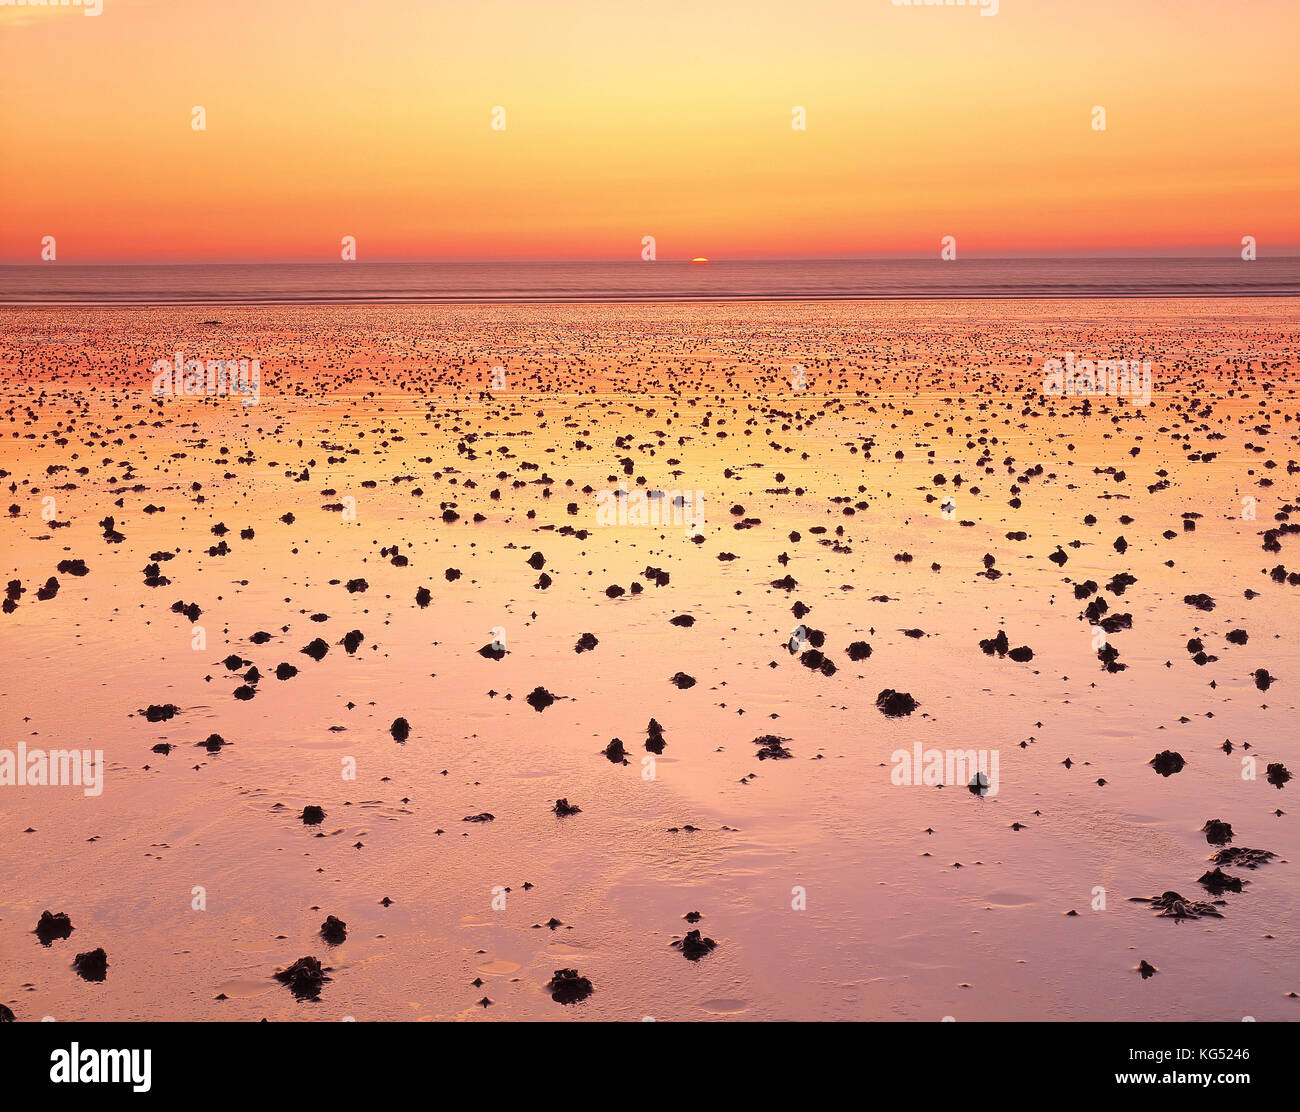 Channel Islands. Guernsey. Worm turnings on beach at sunset. Stock Photo